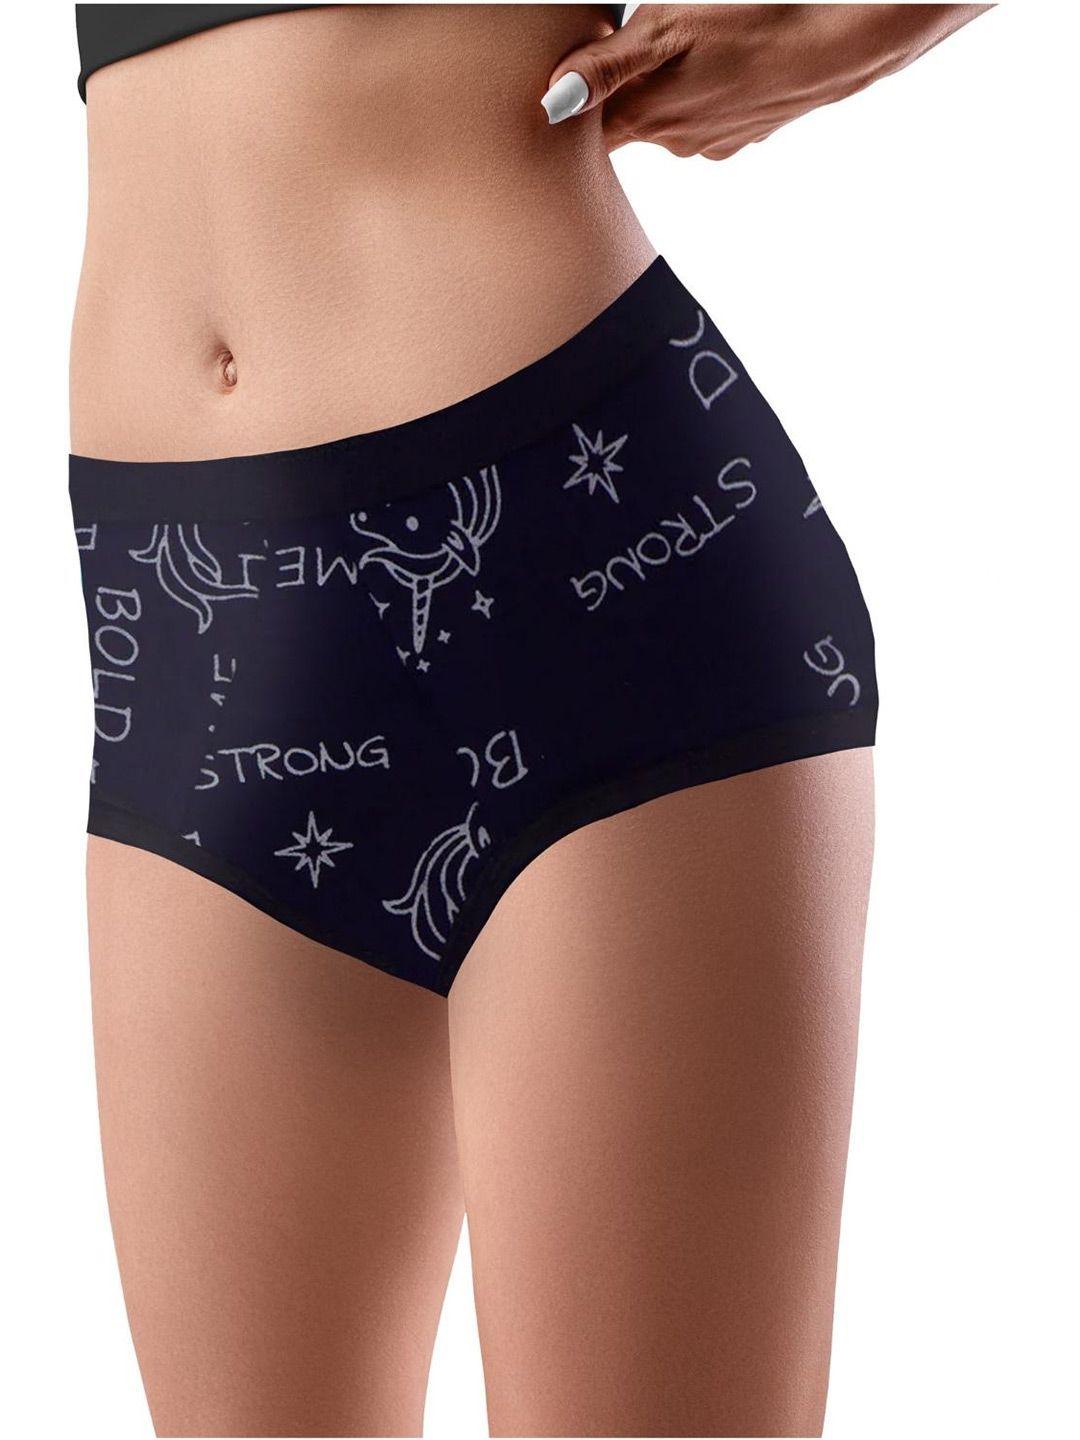 dchica printed reusable period panty